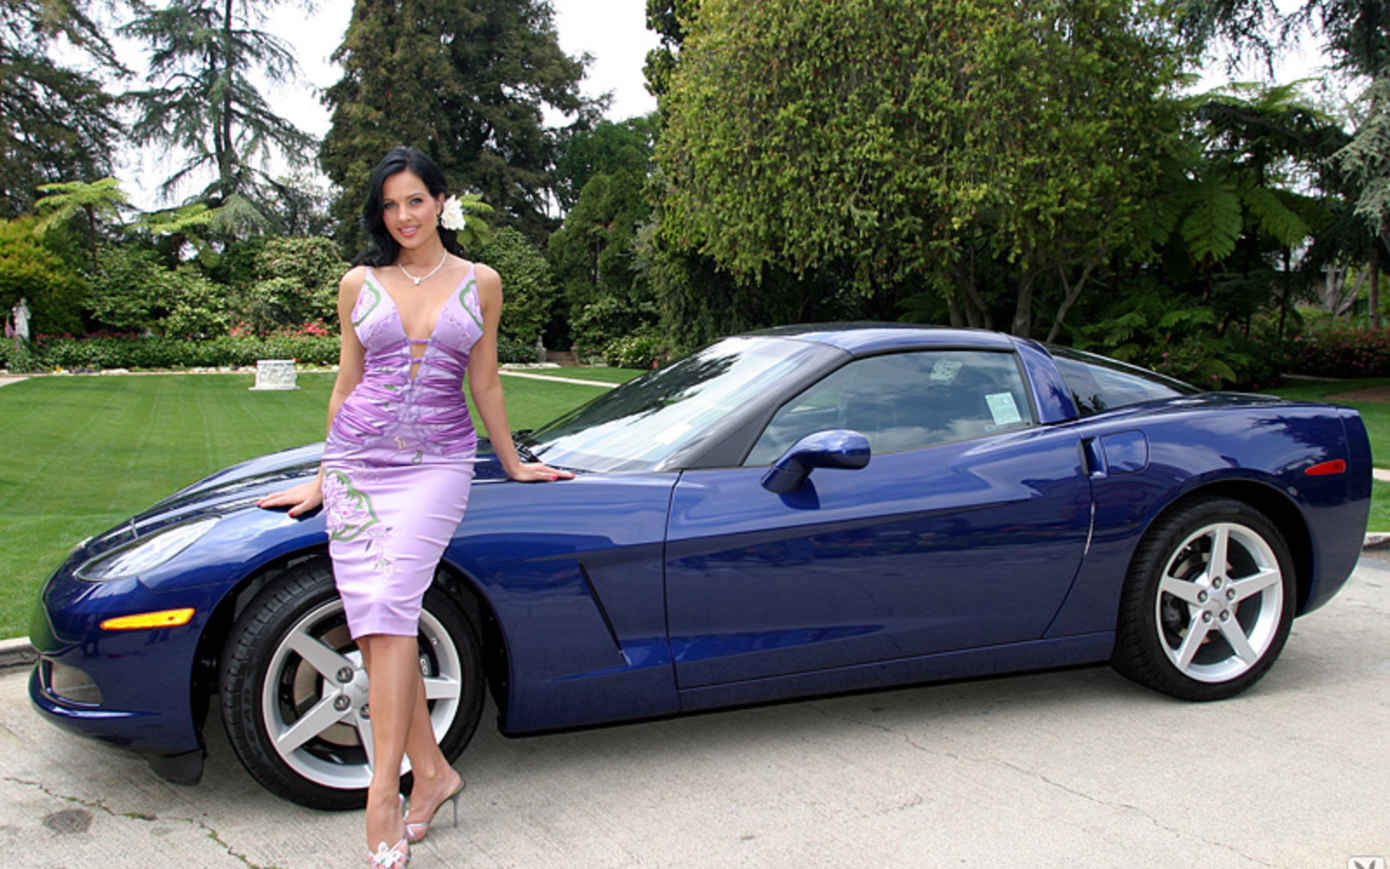 Playboy playmates of the year and their cars